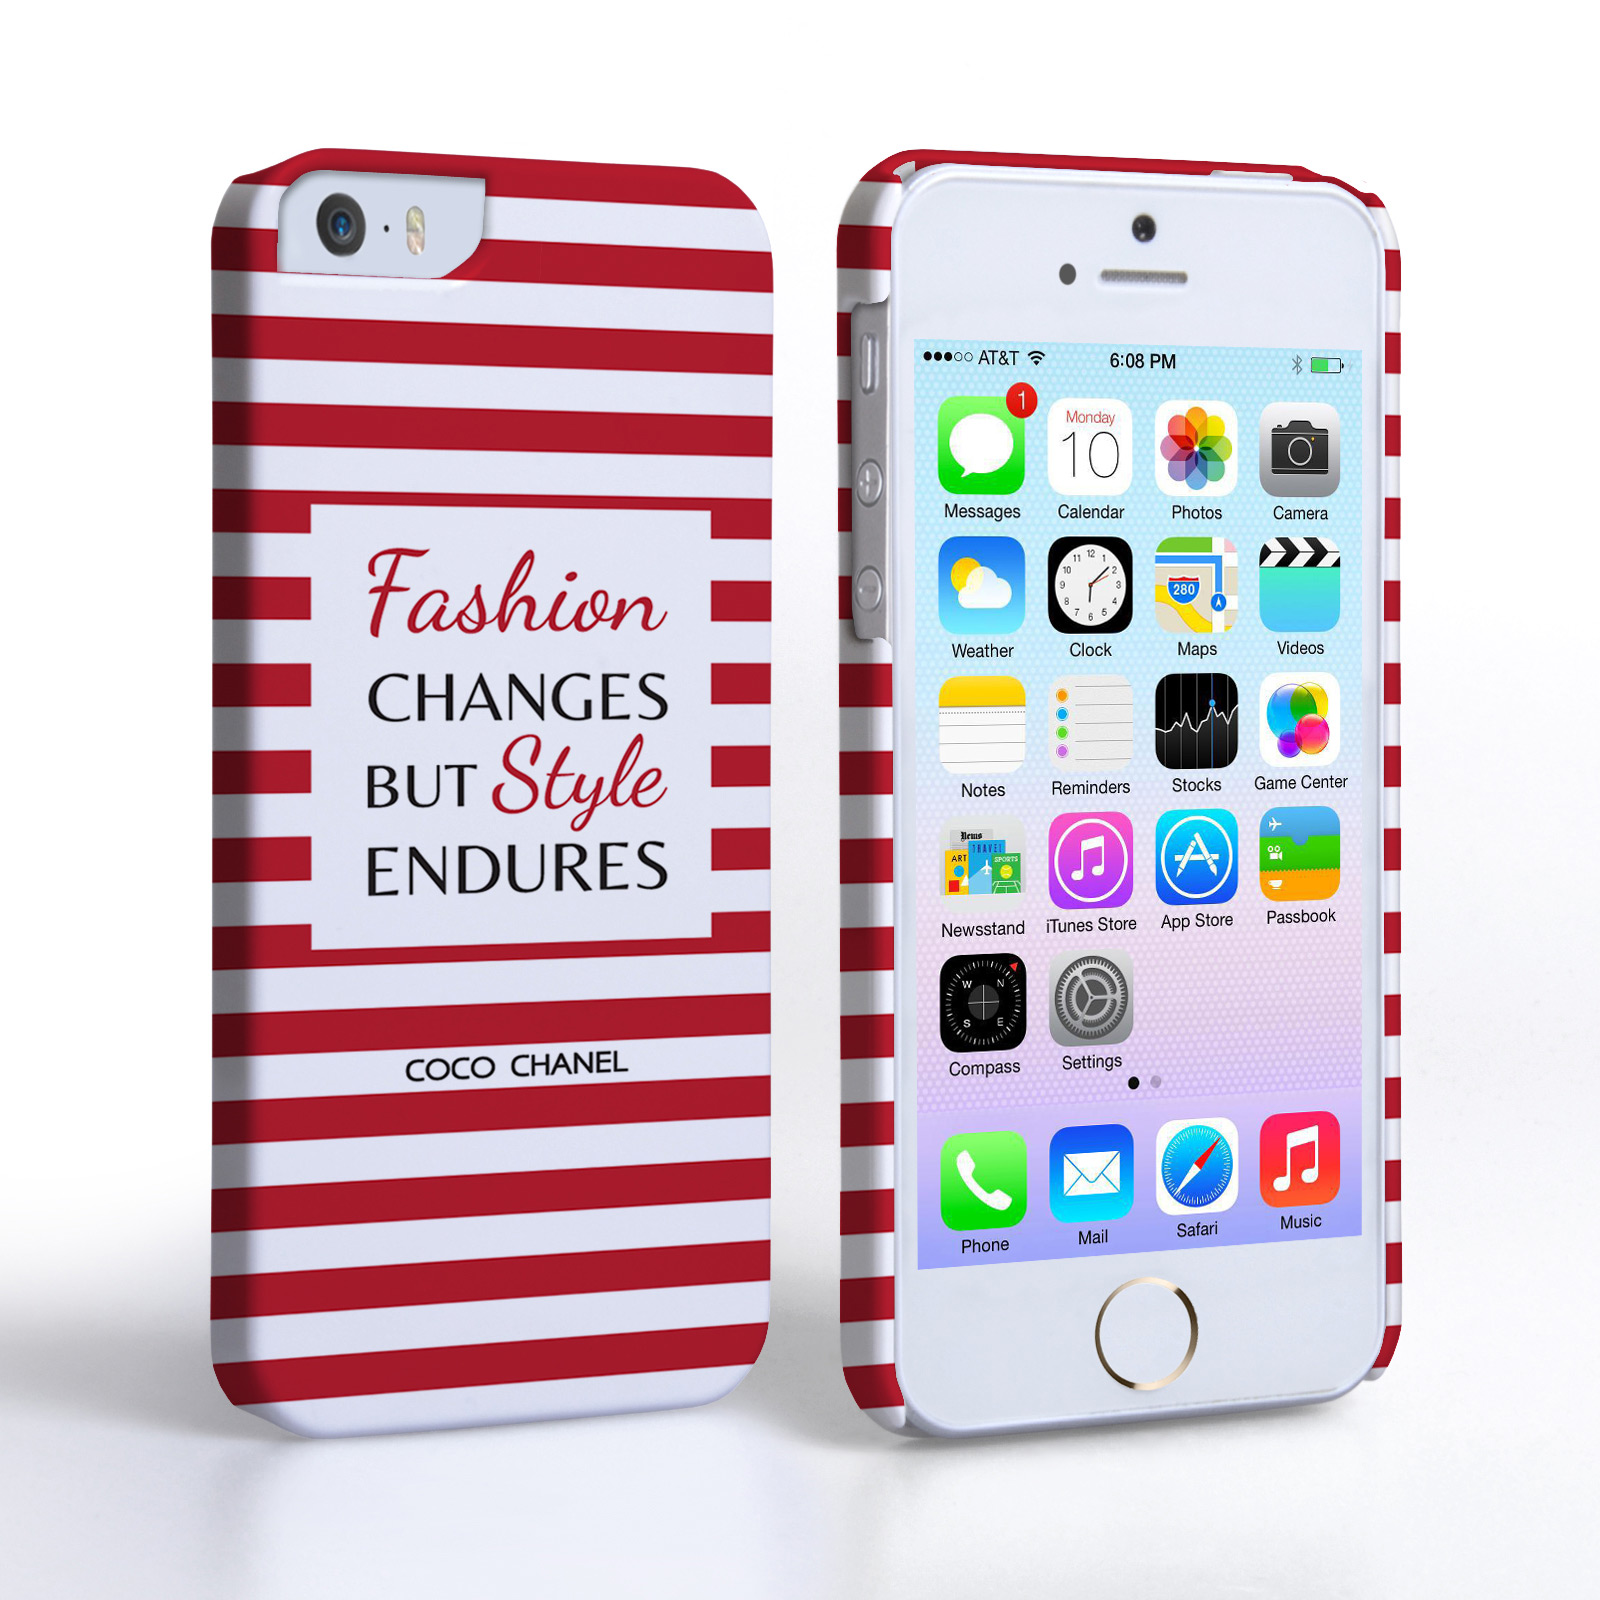 Iphone 5 Chanel Fashion Changes Quote Case Red